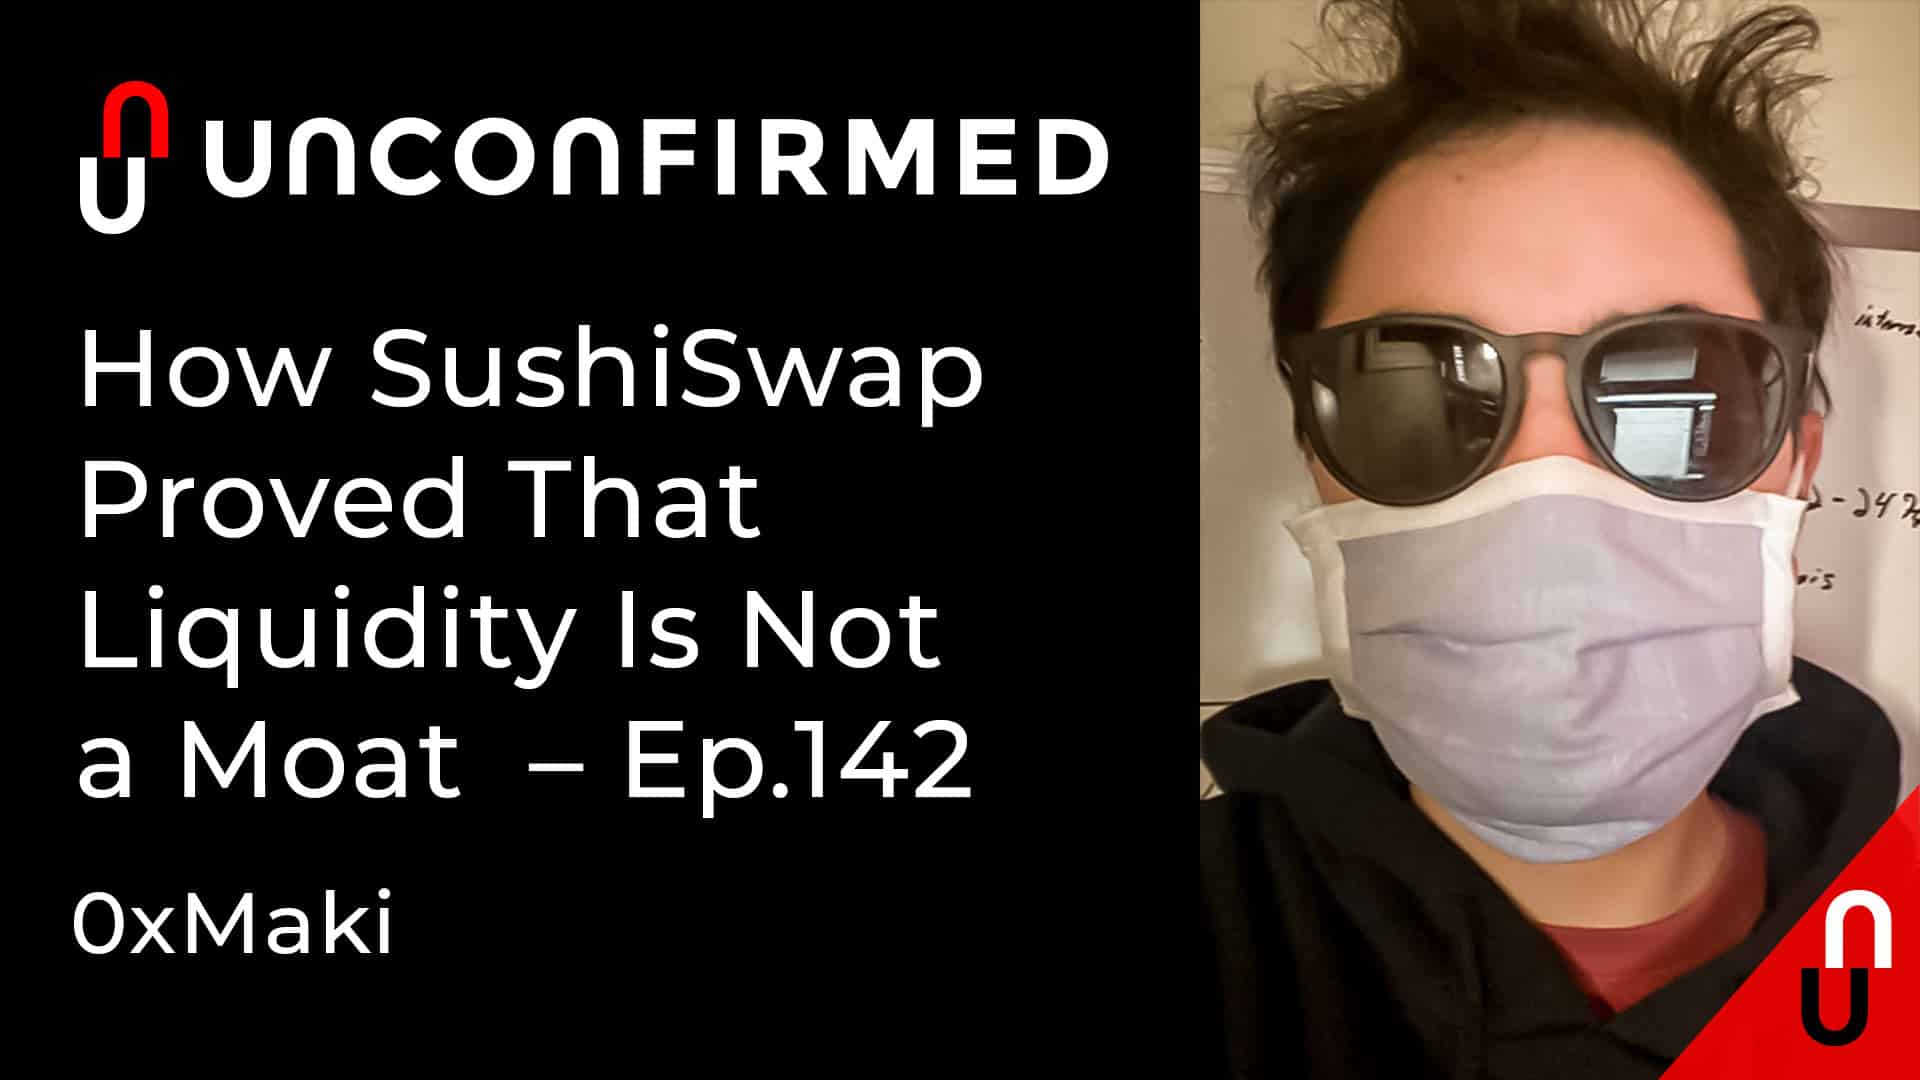 Unconfirmed - Ep.142 - How SushiSwap Proved That Liquidity Is Not a Moat